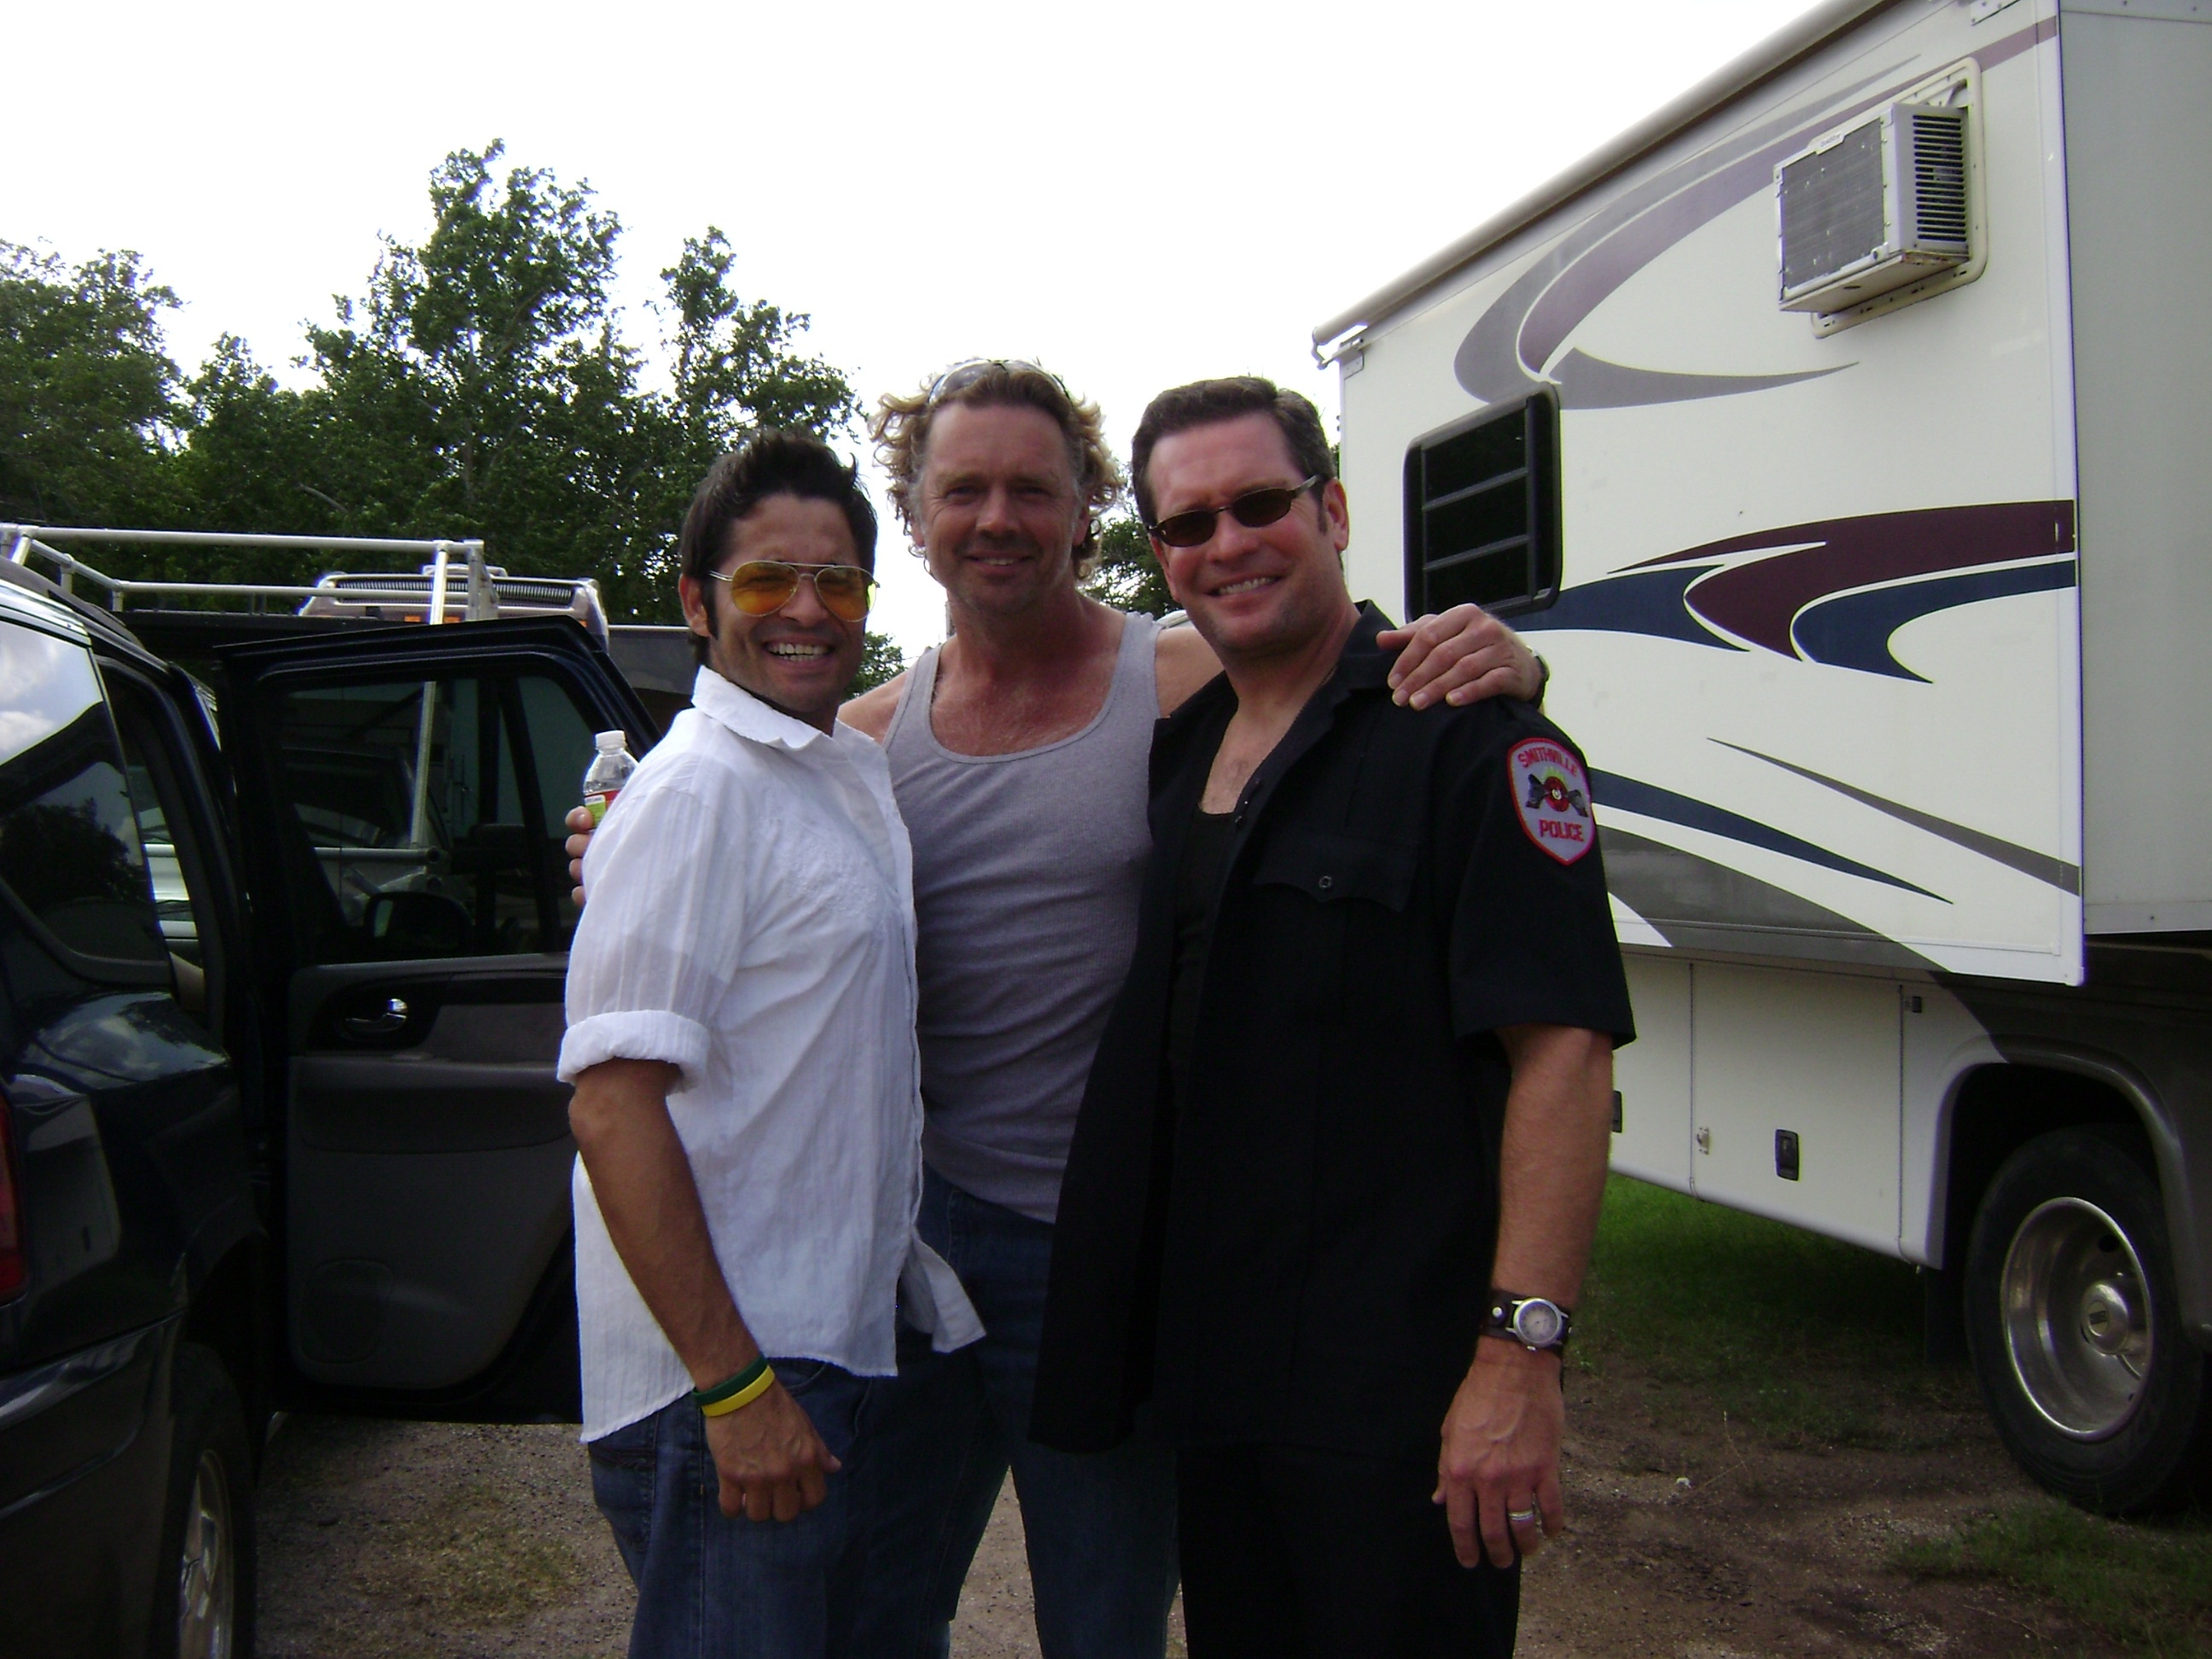 As Deputy Sheriff Charlie in DOONBY with John Schneider